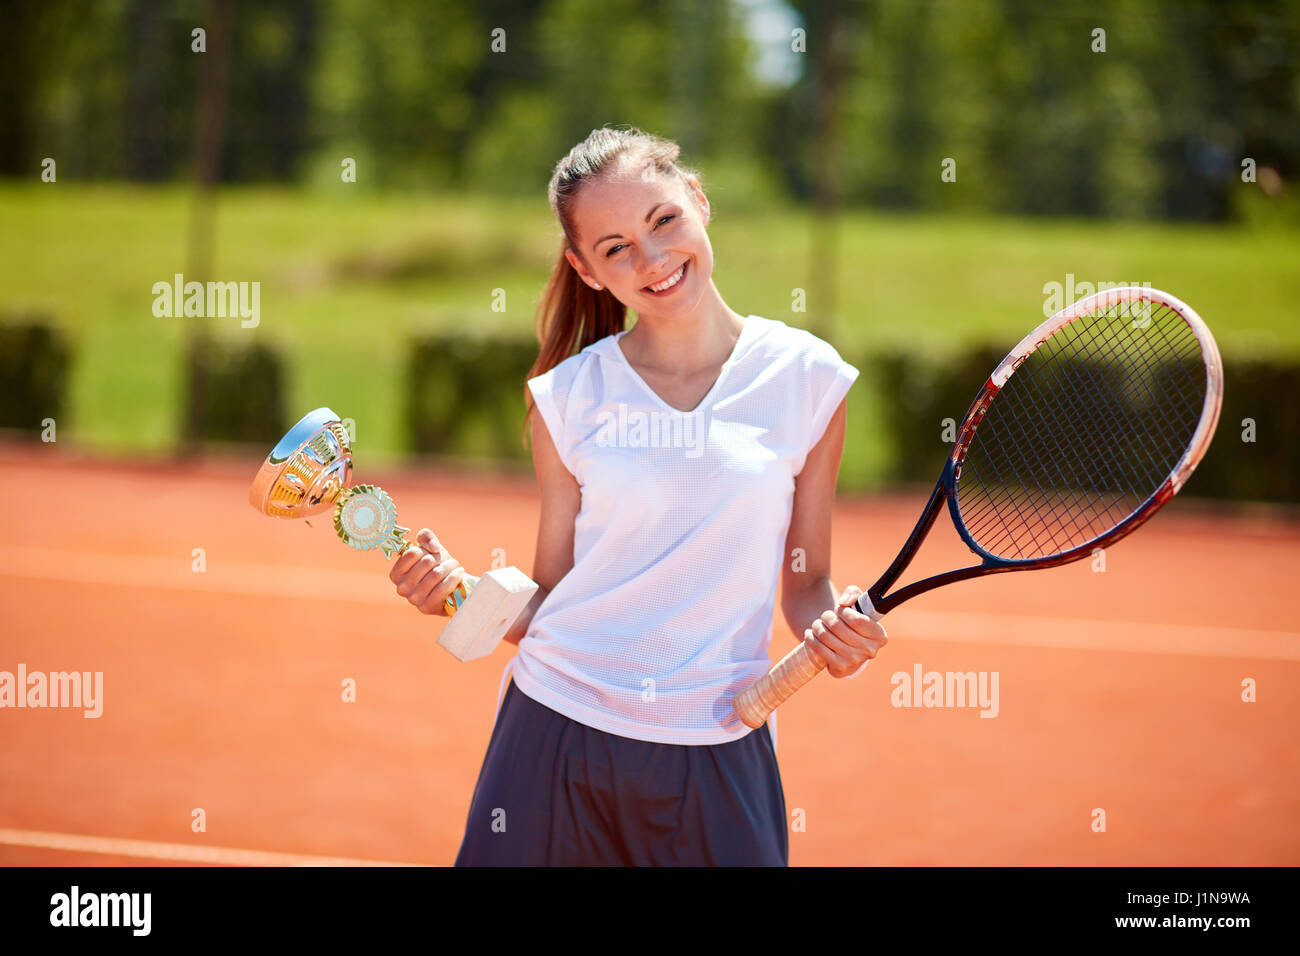 Young female winner in tennis match holding goblet on tennis court Stock Photo